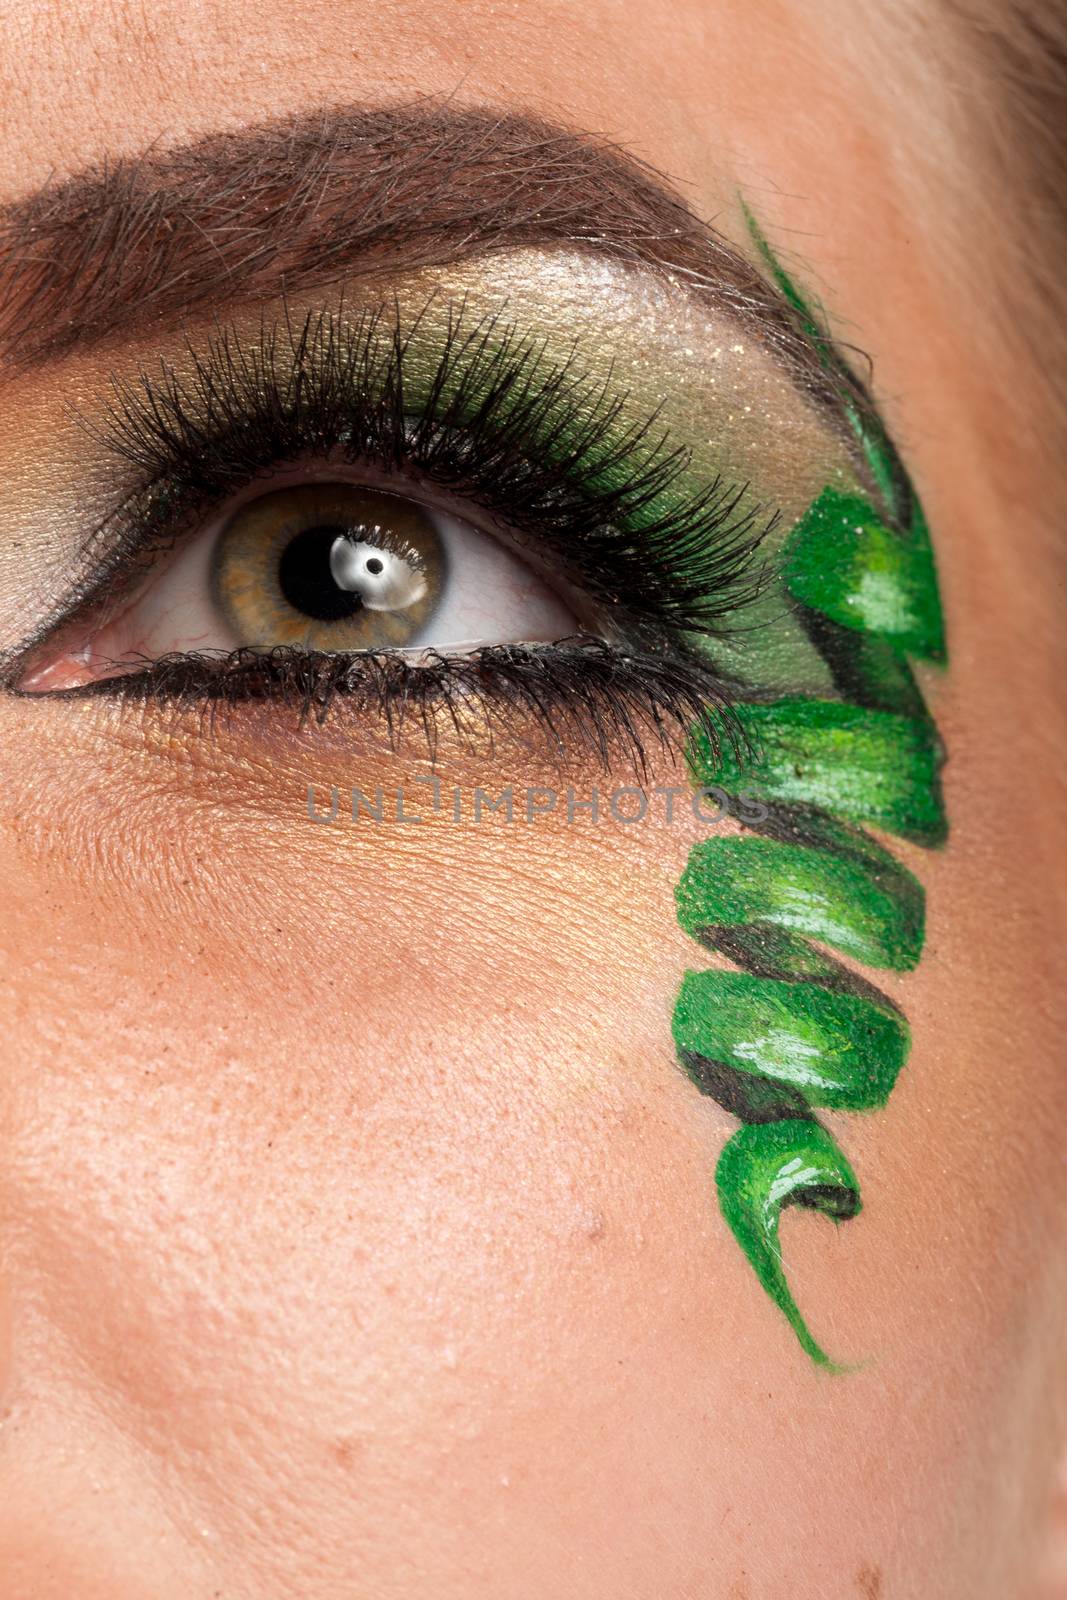 Close up of an eye with green artistic make up in studio photo